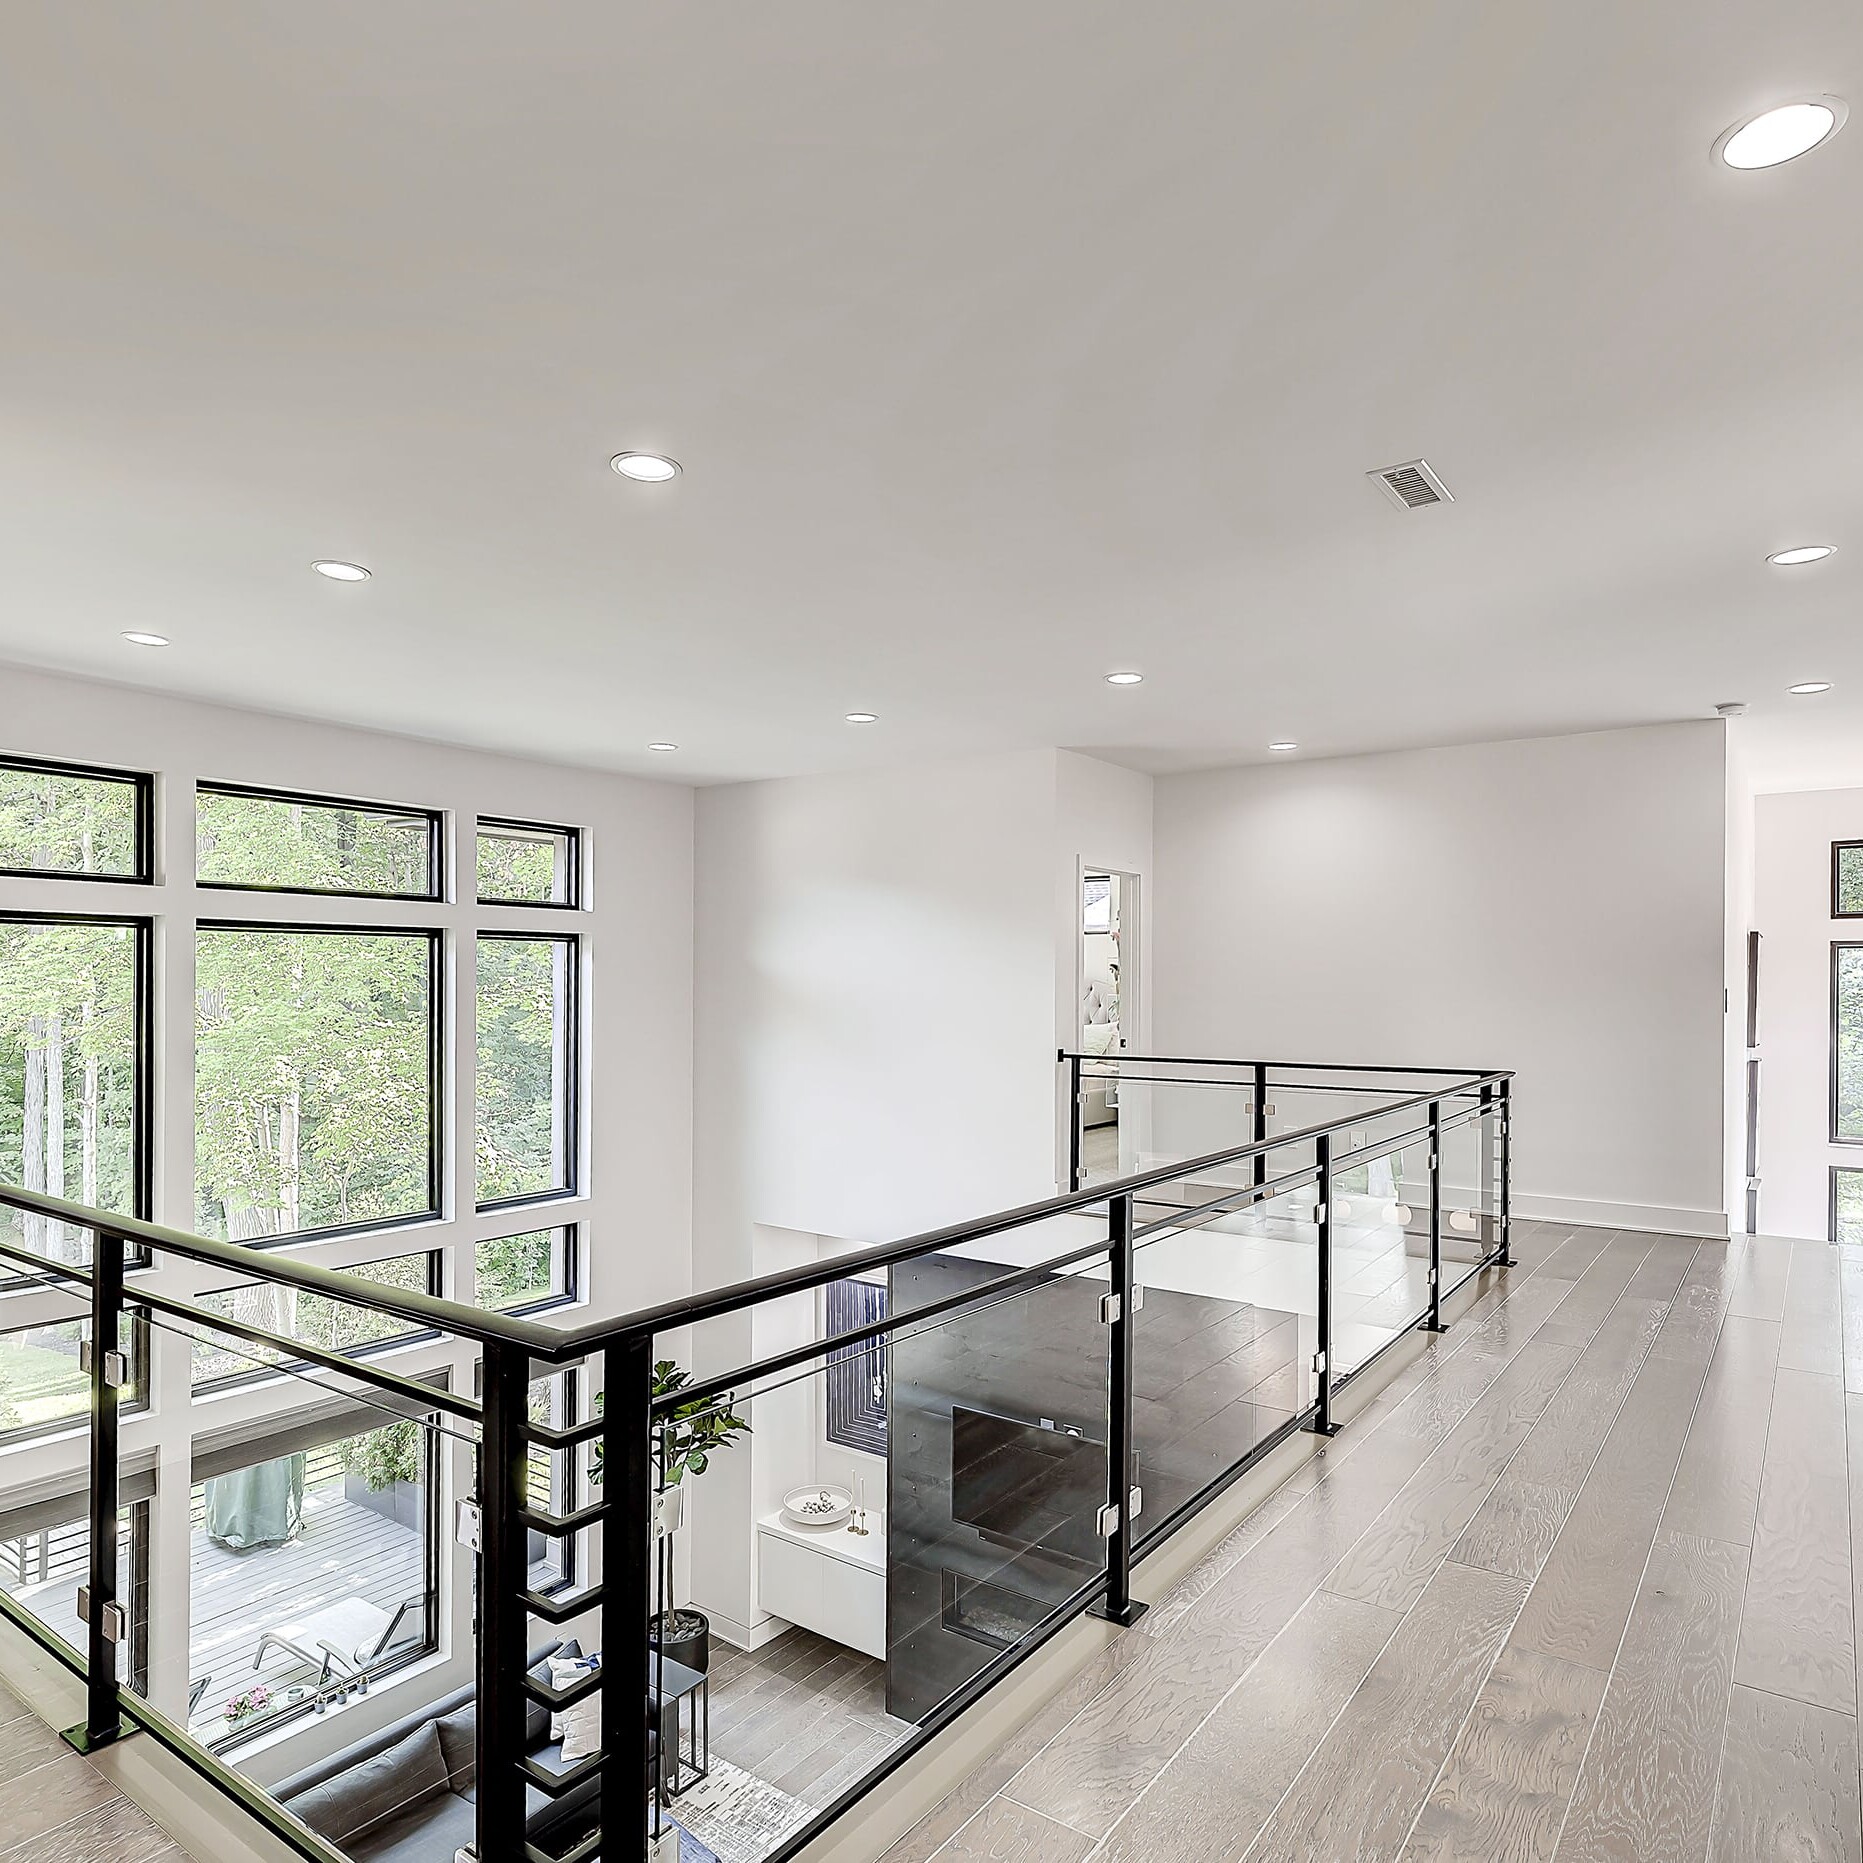 A home with hardwood floors and glass railings.